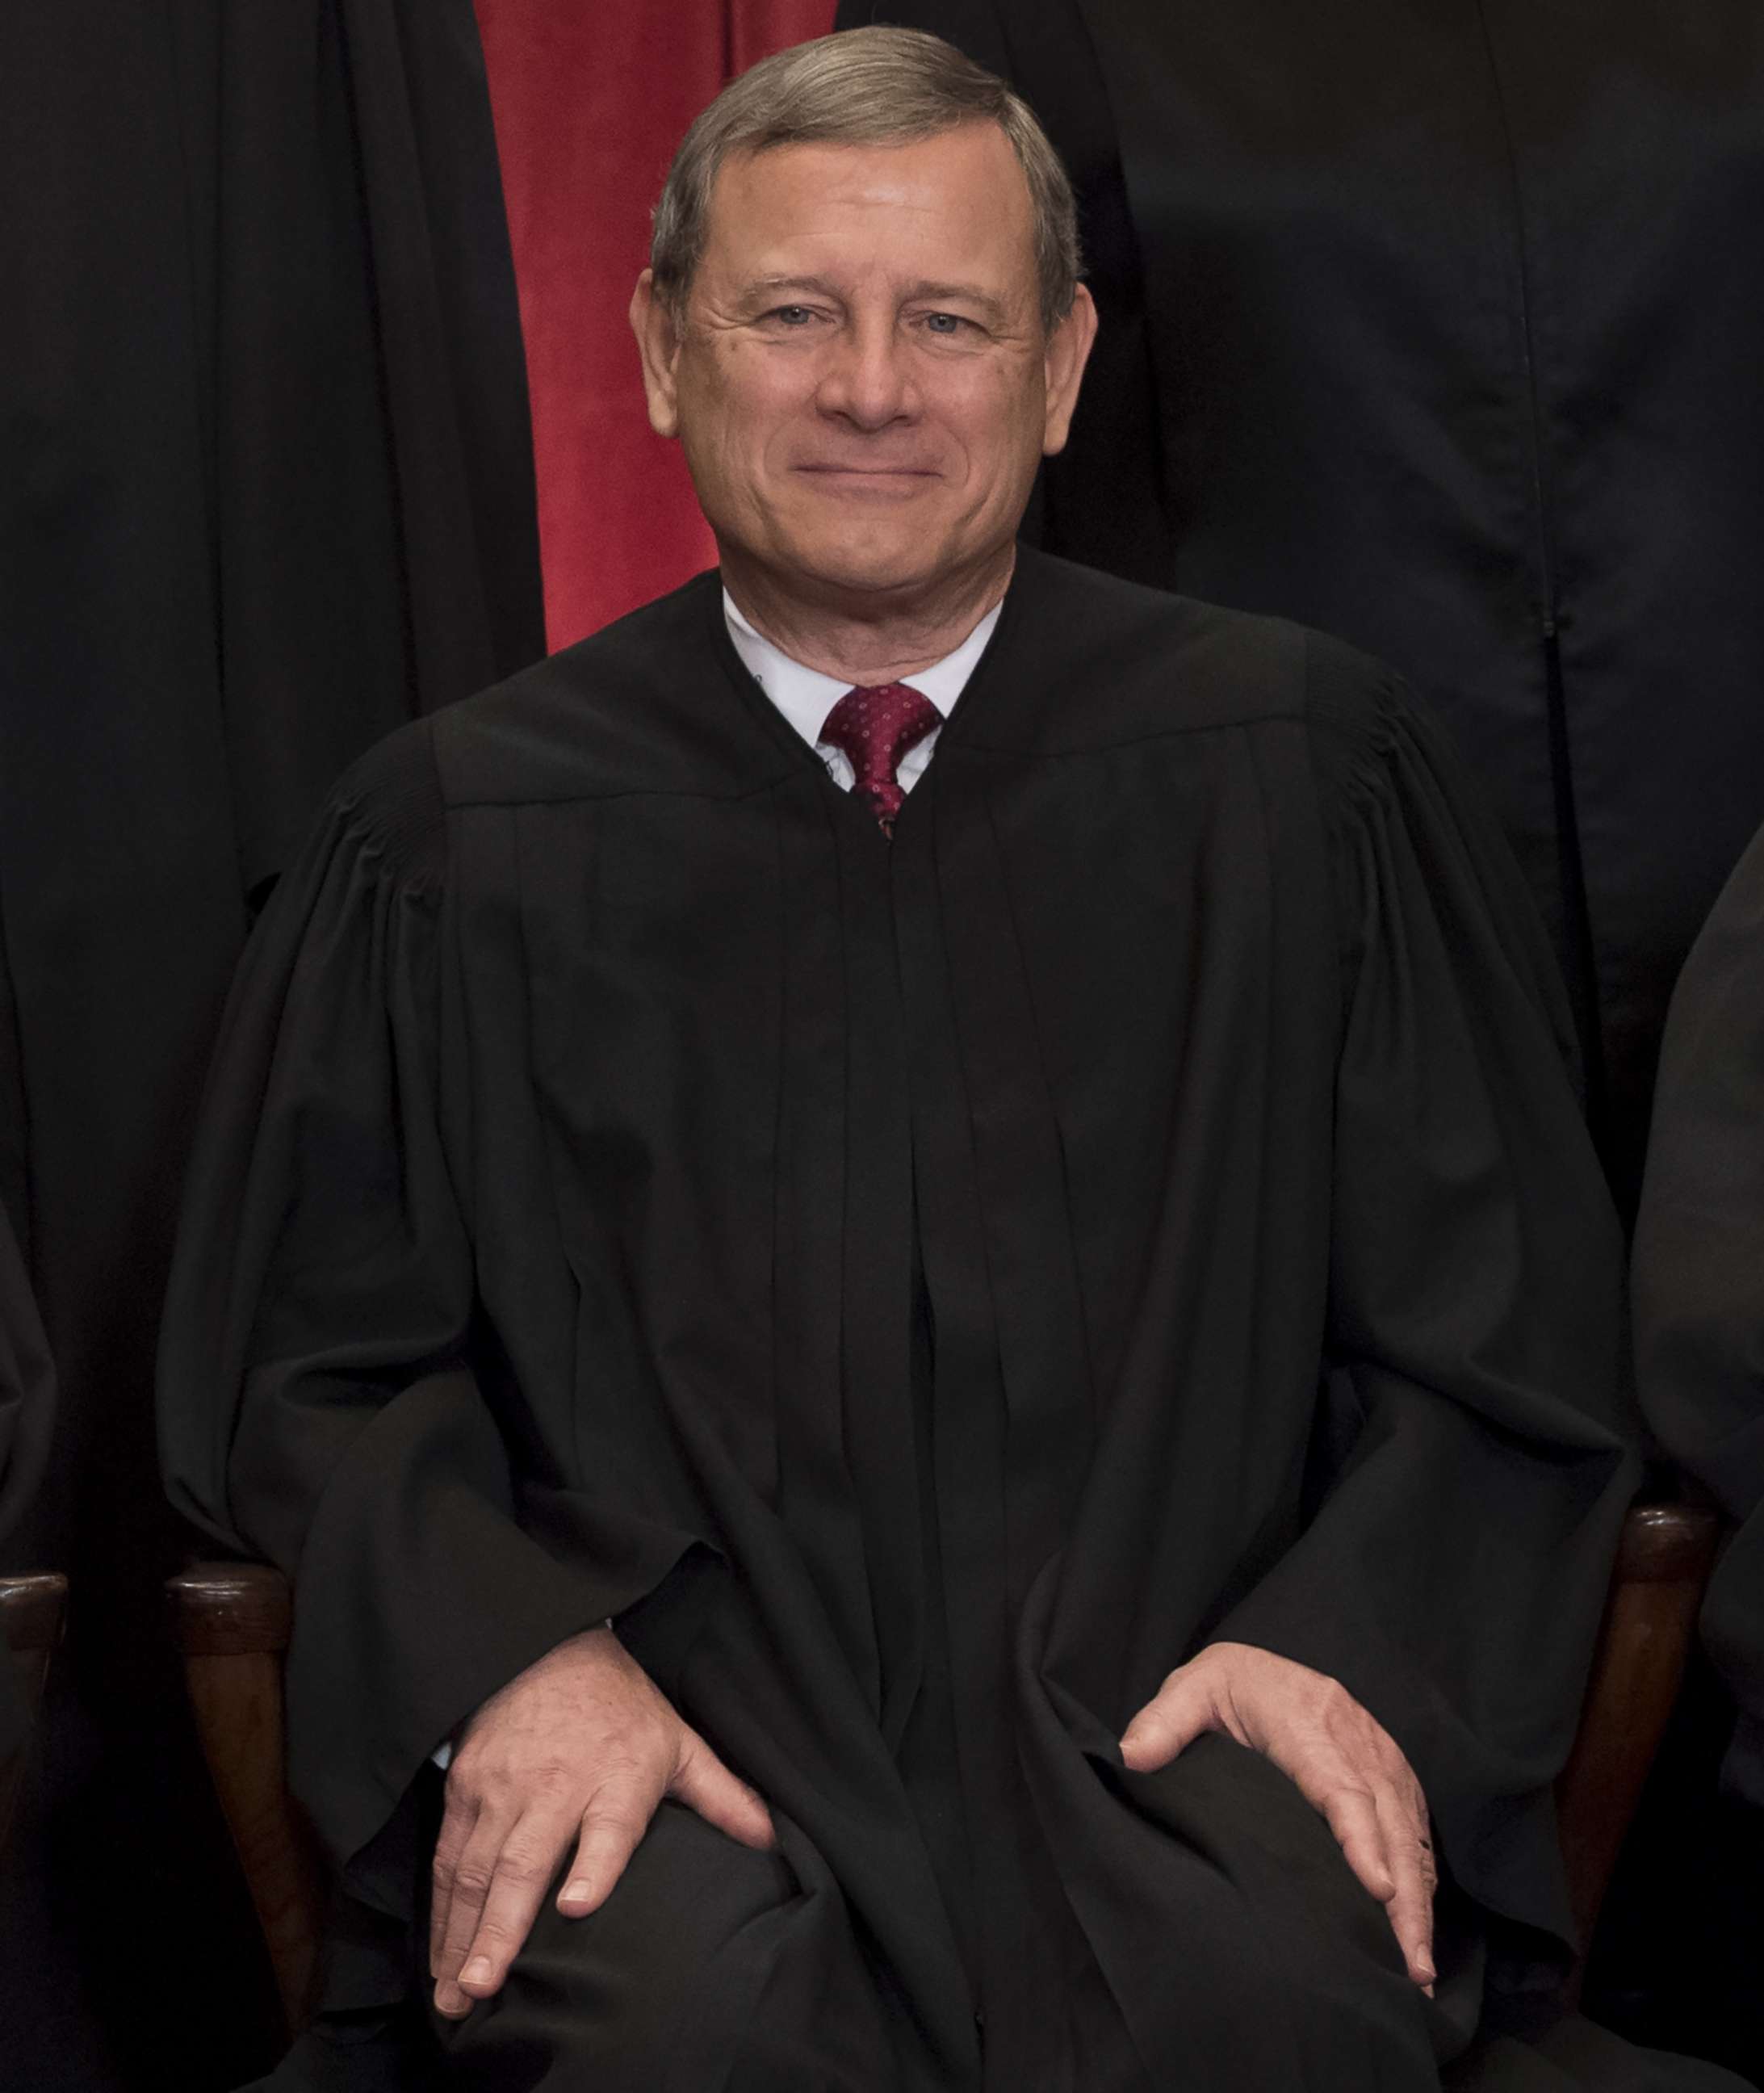 PHOTO: Chief Justice of the United States John G. Roberts sits for an official photo in the Supreme Court in Washington, June 1, 2017.